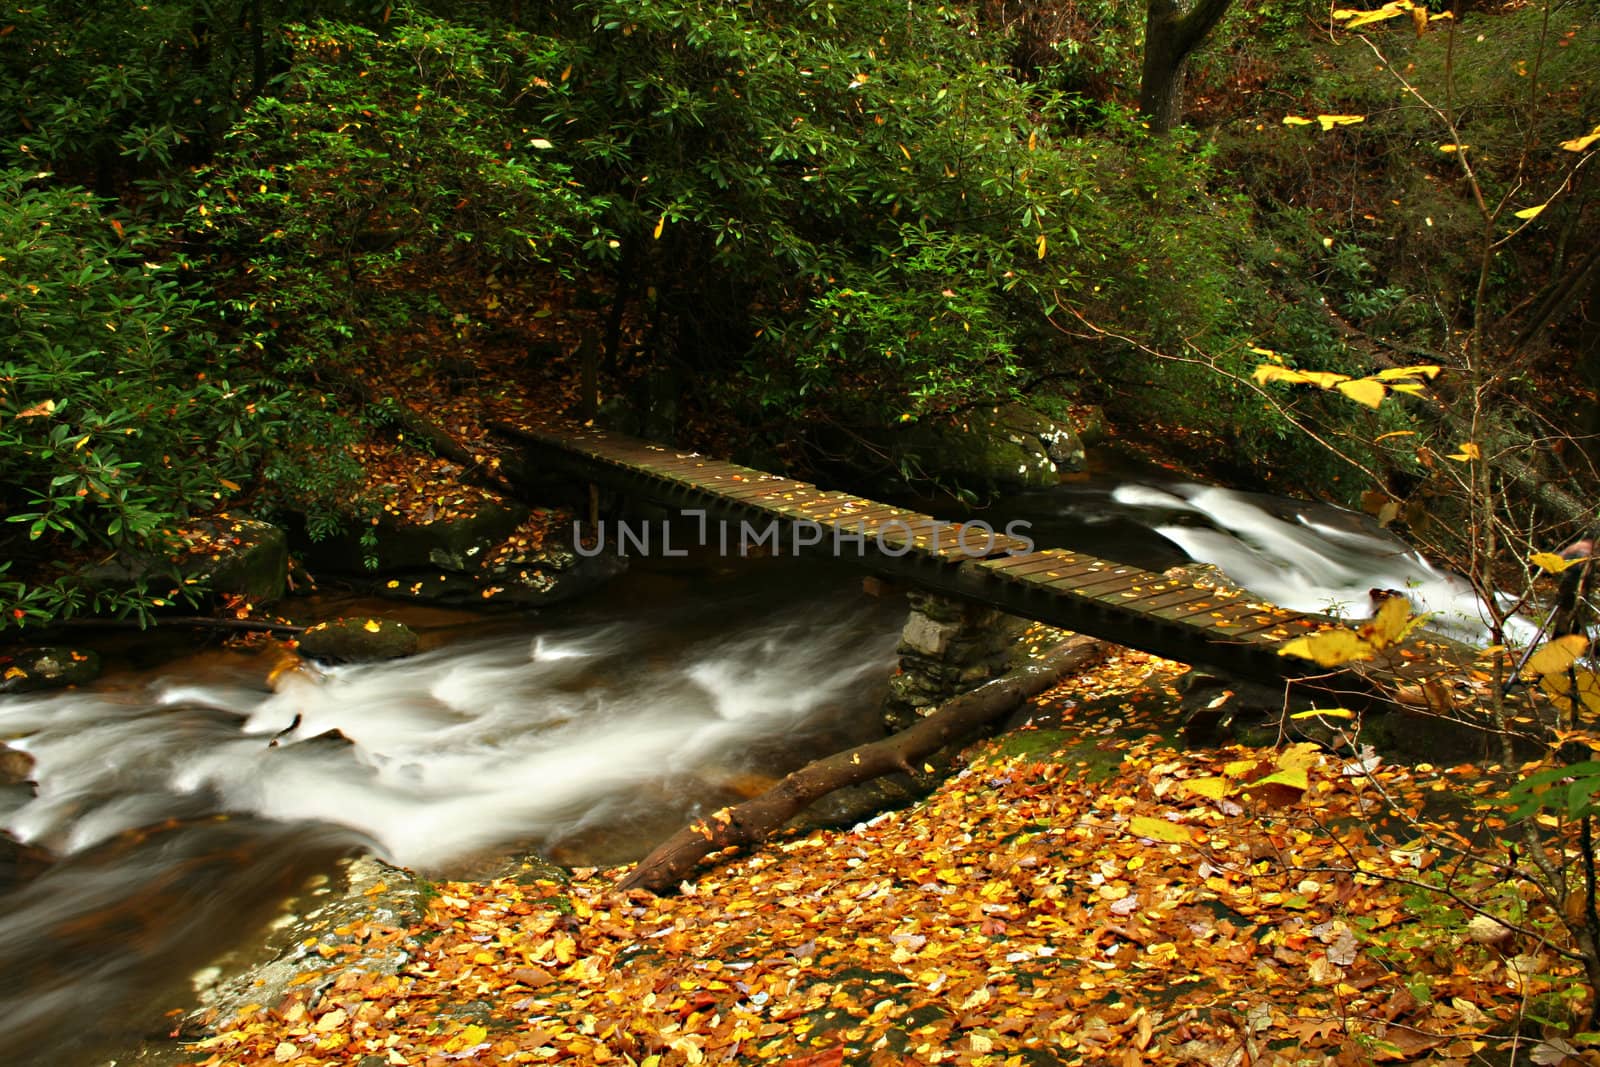 Creek with small foot bridge during autumn of the year.